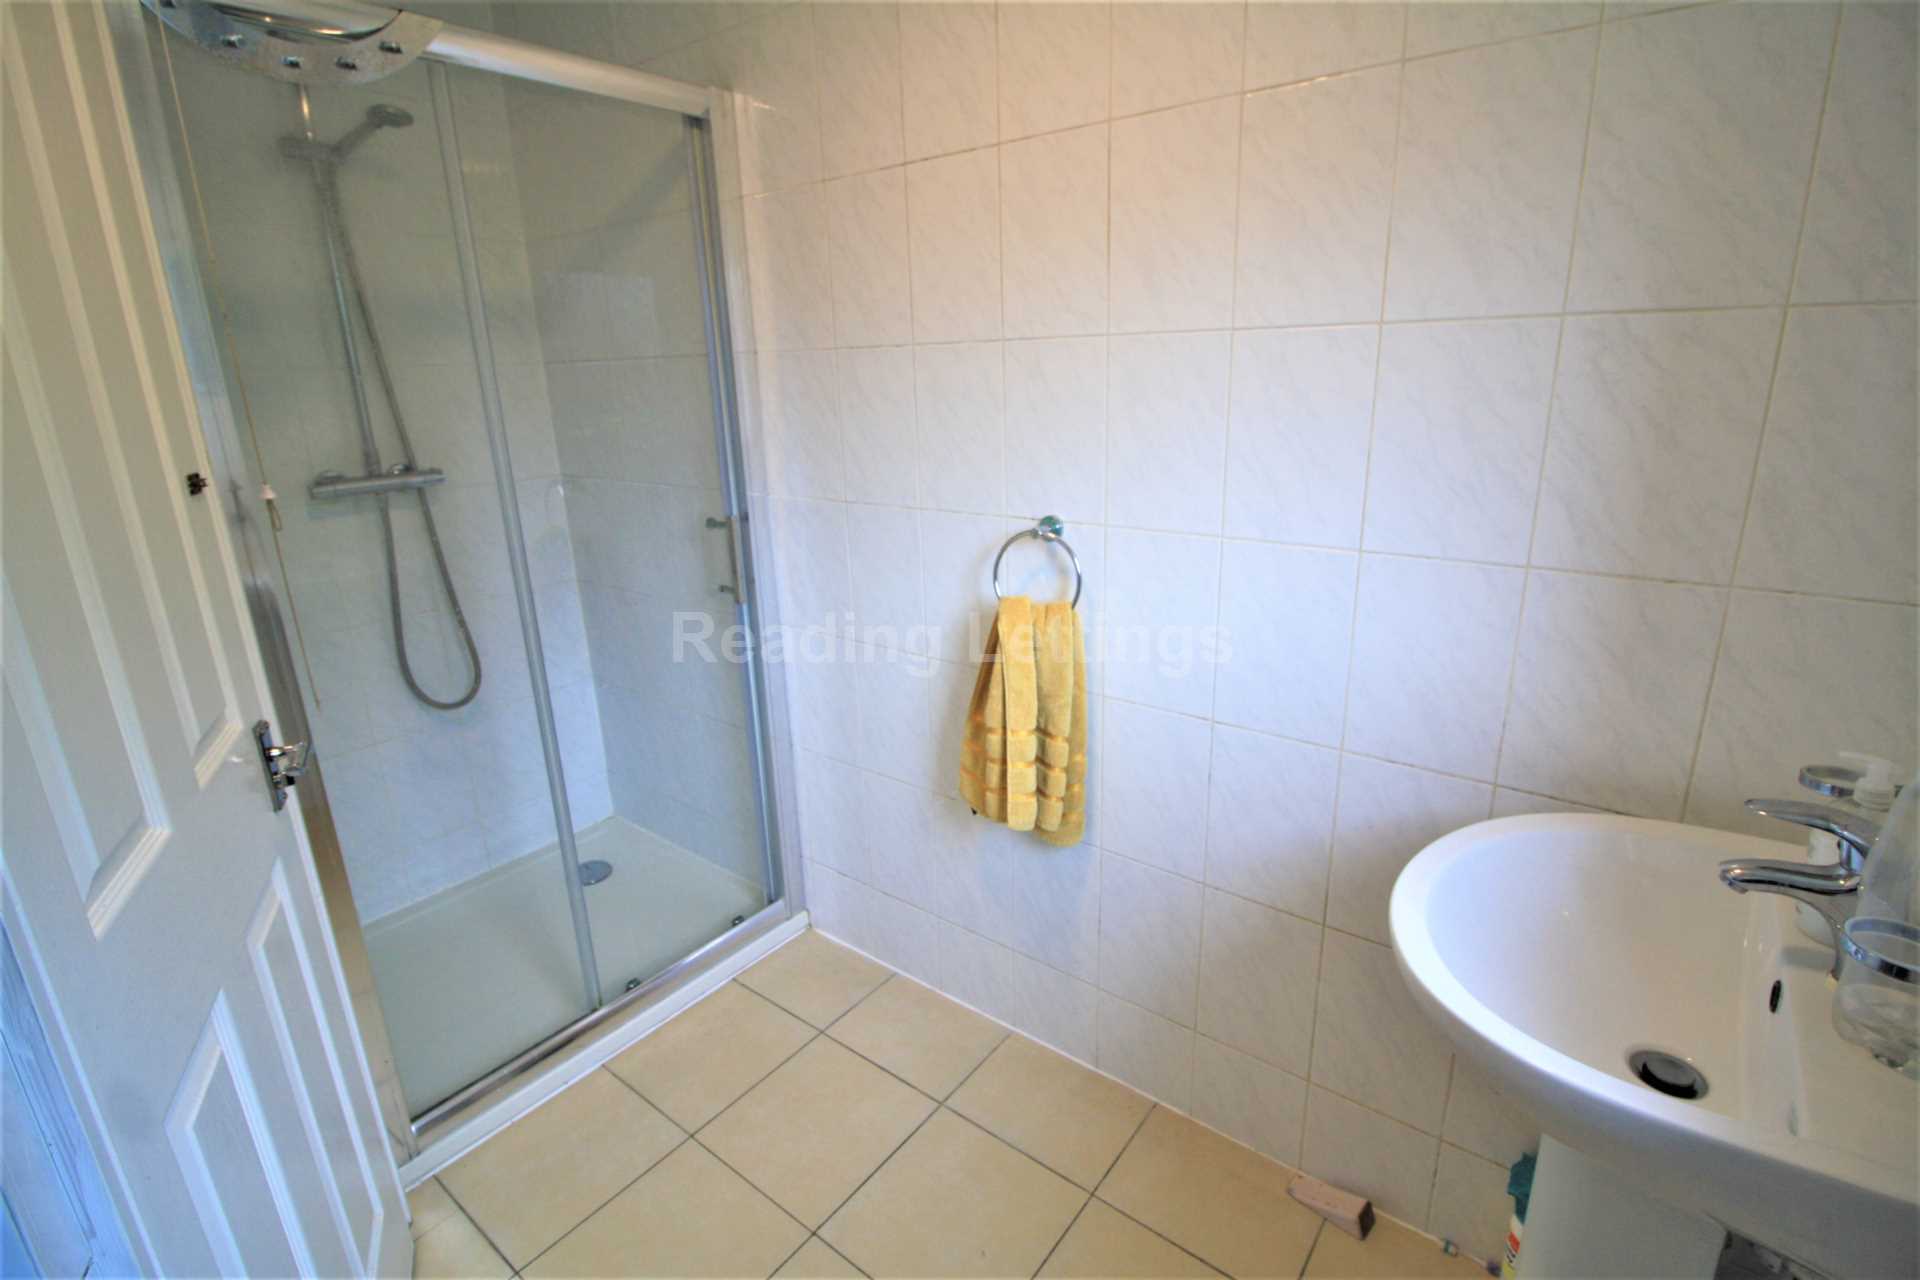 Hatherley Road, Reading - GAS INCLUDED, Image 5